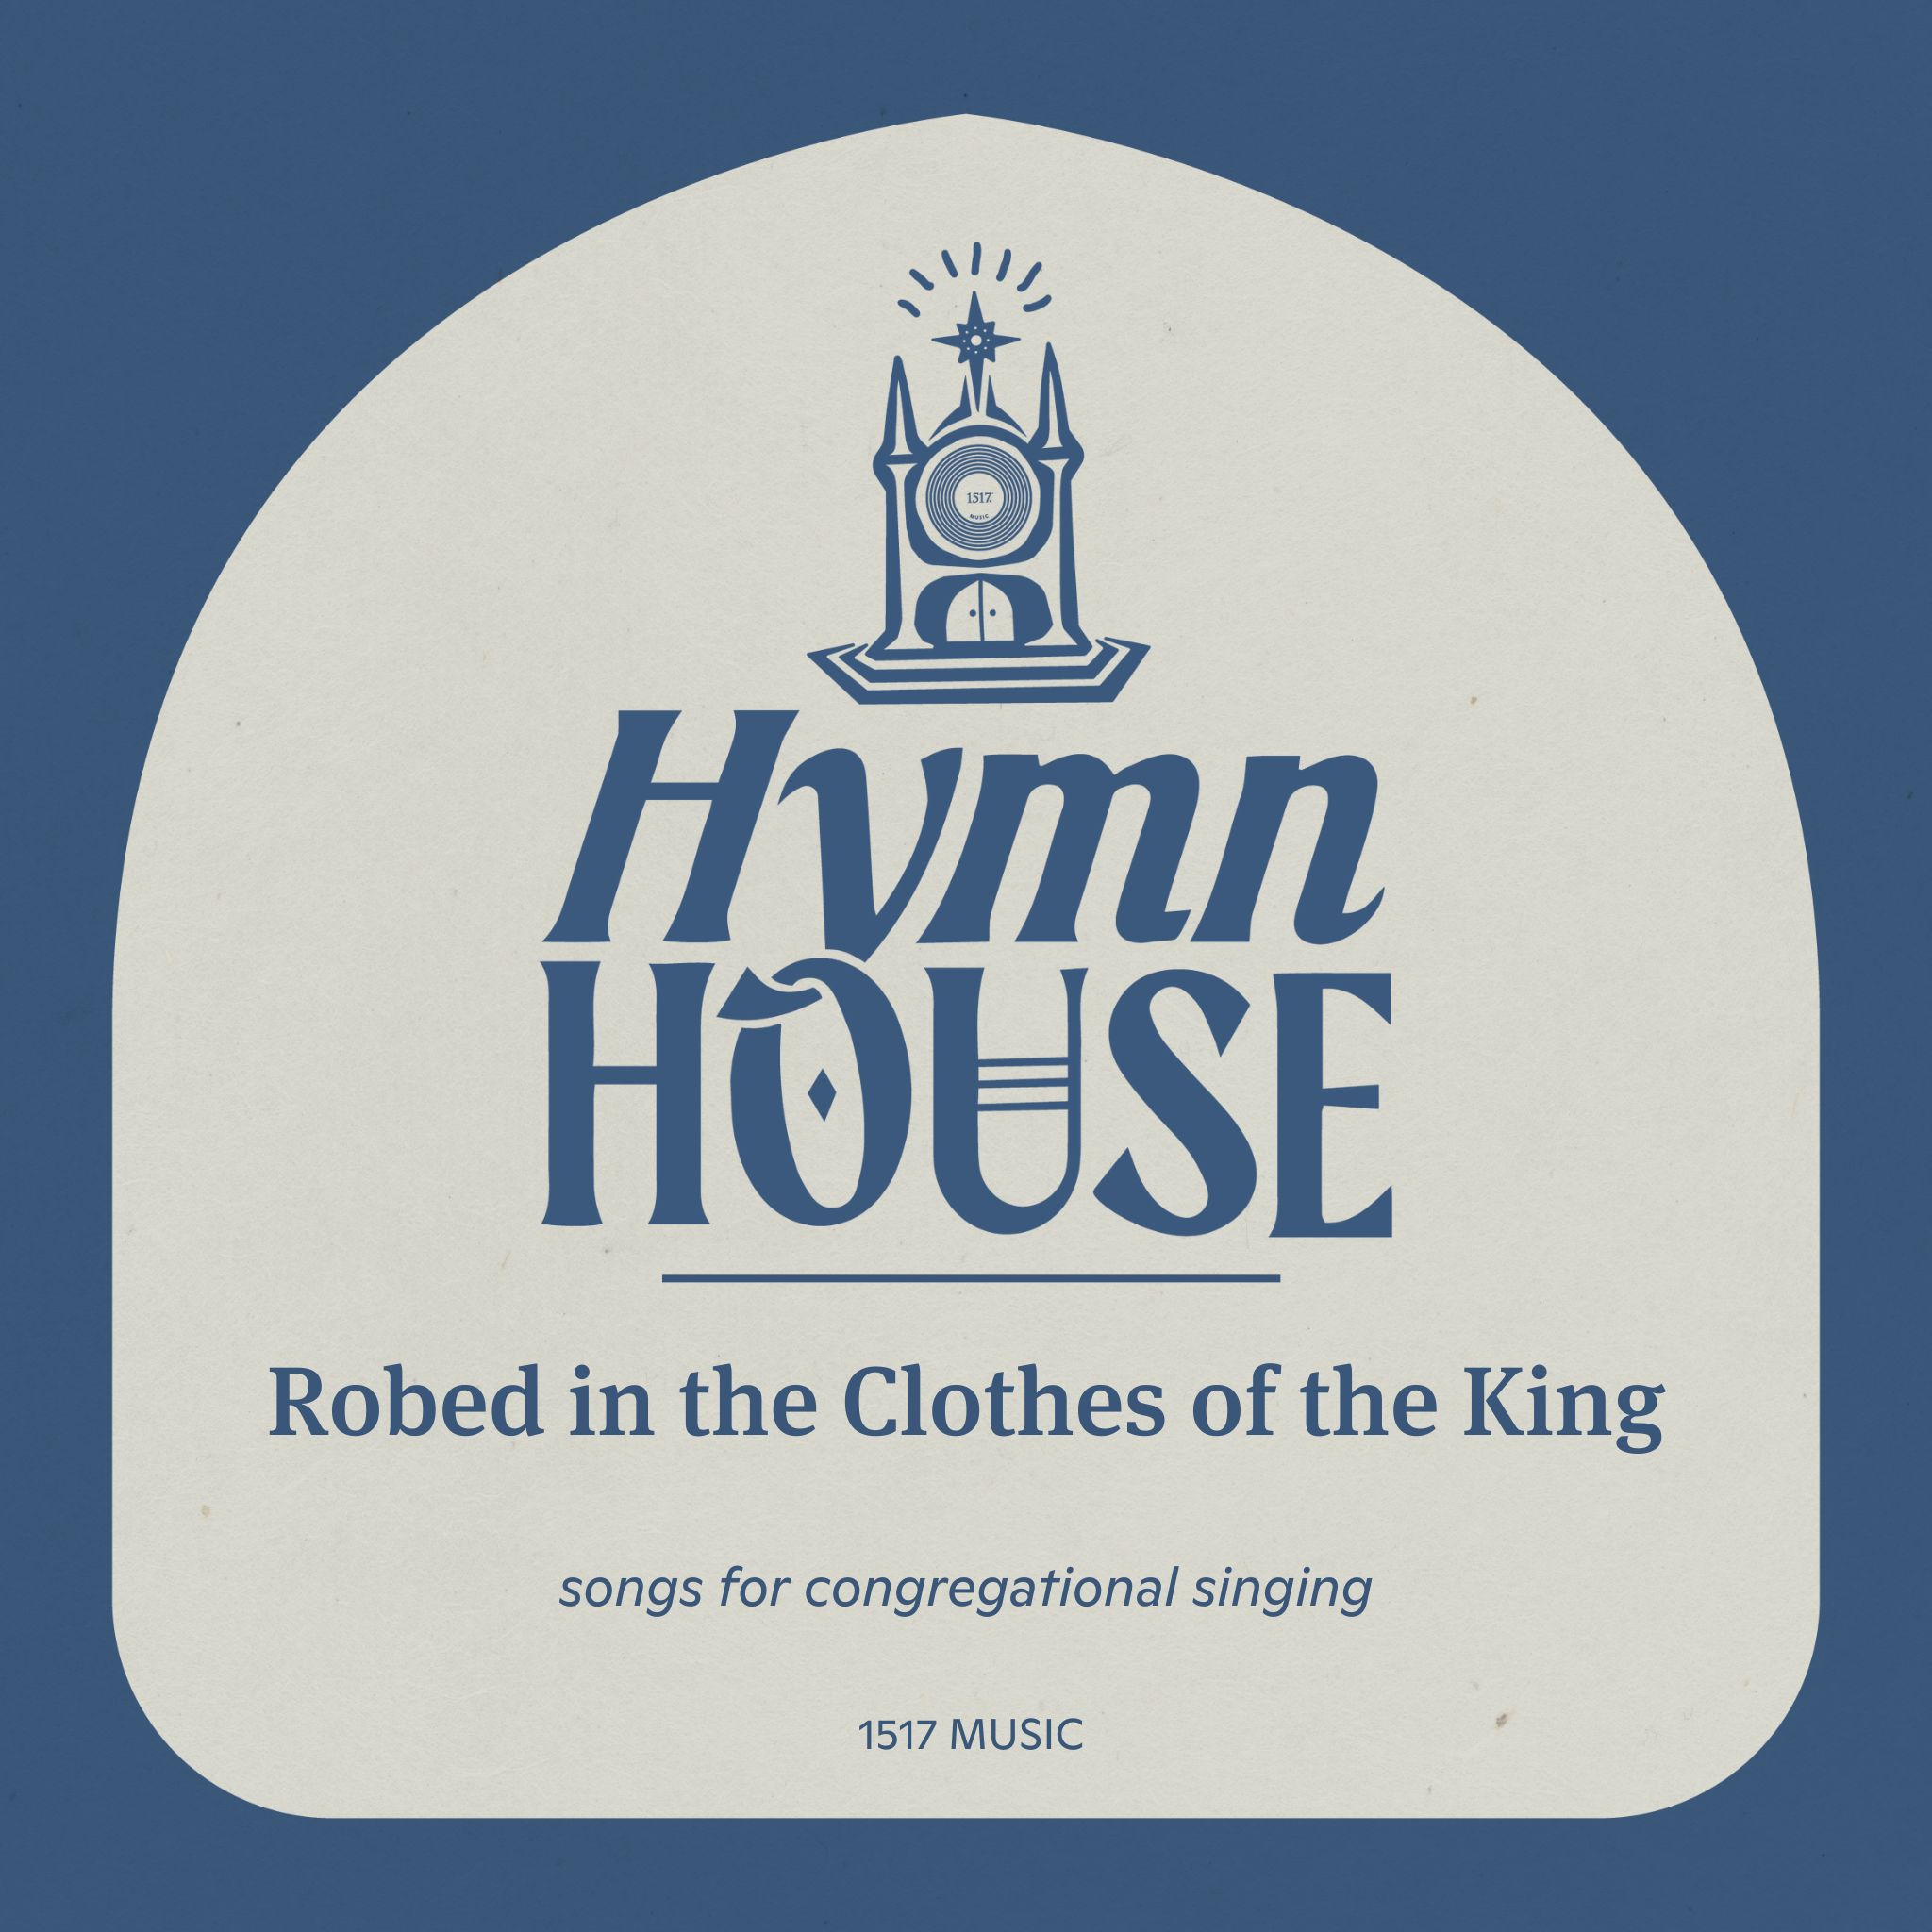 Robed in the Clothes of the King (Hymn House)